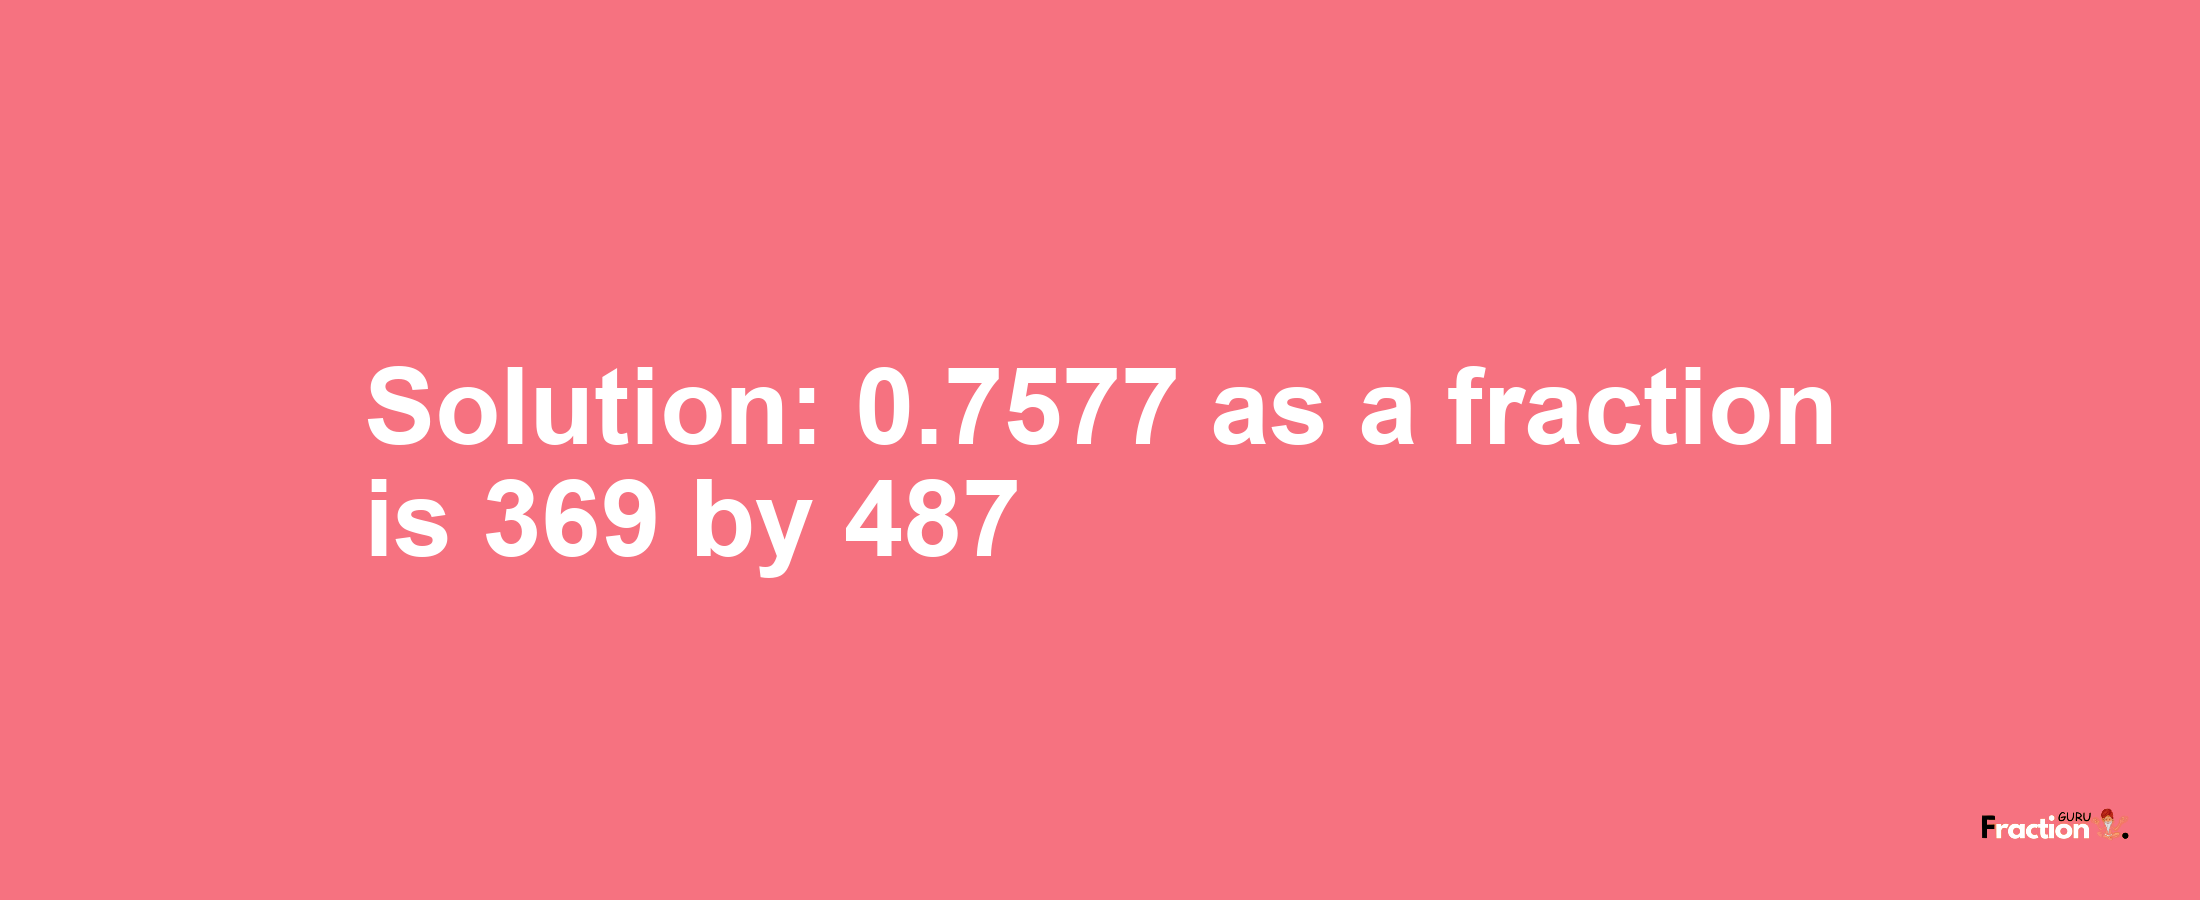 Solution:0.7577 as a fraction is 369/487